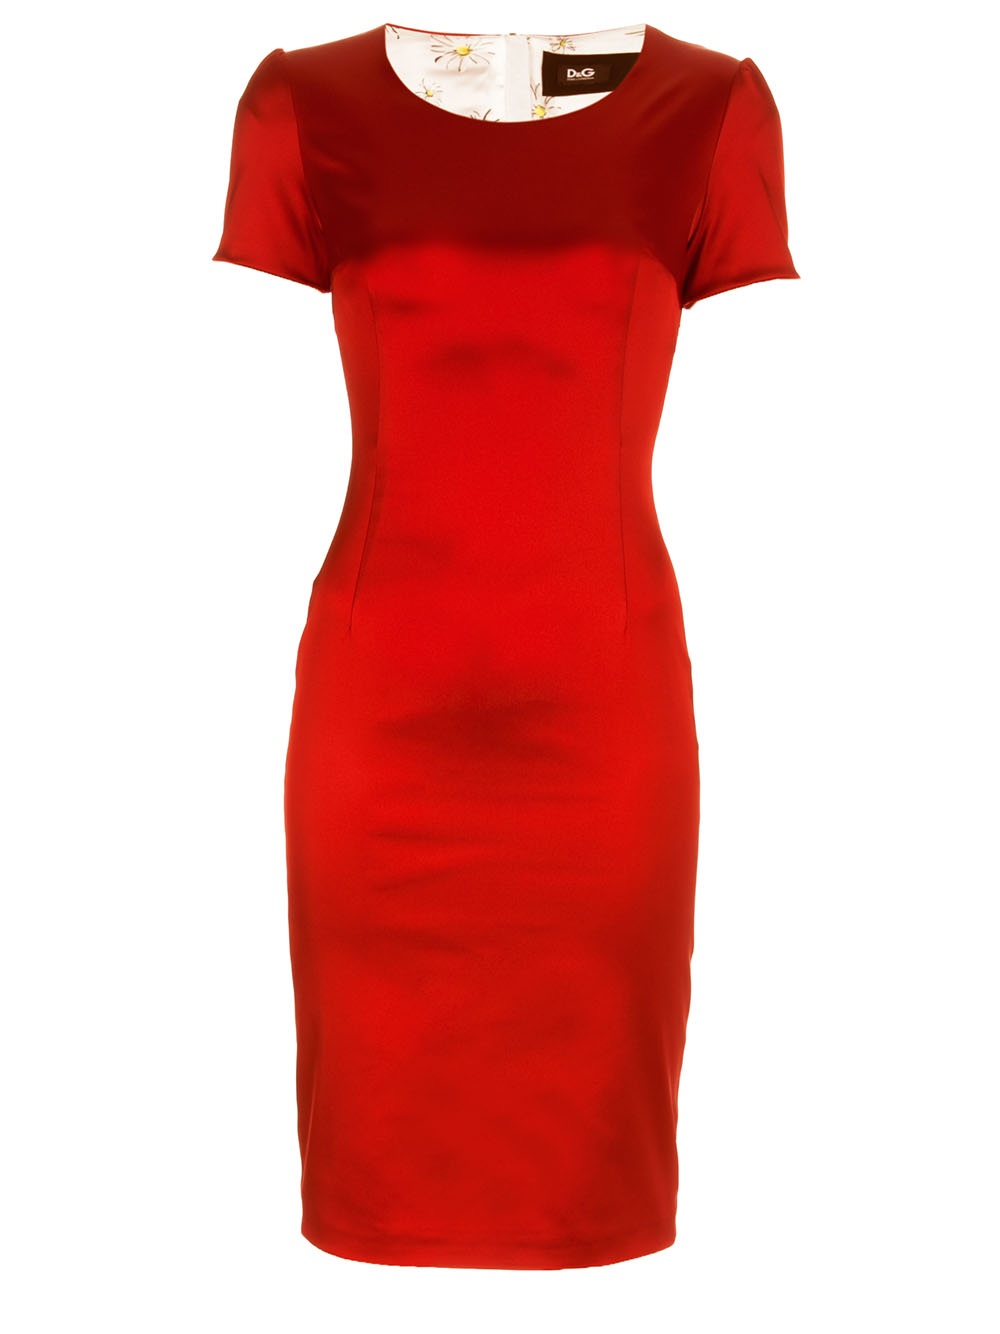 D&g Satin Dress in Red | Lyst